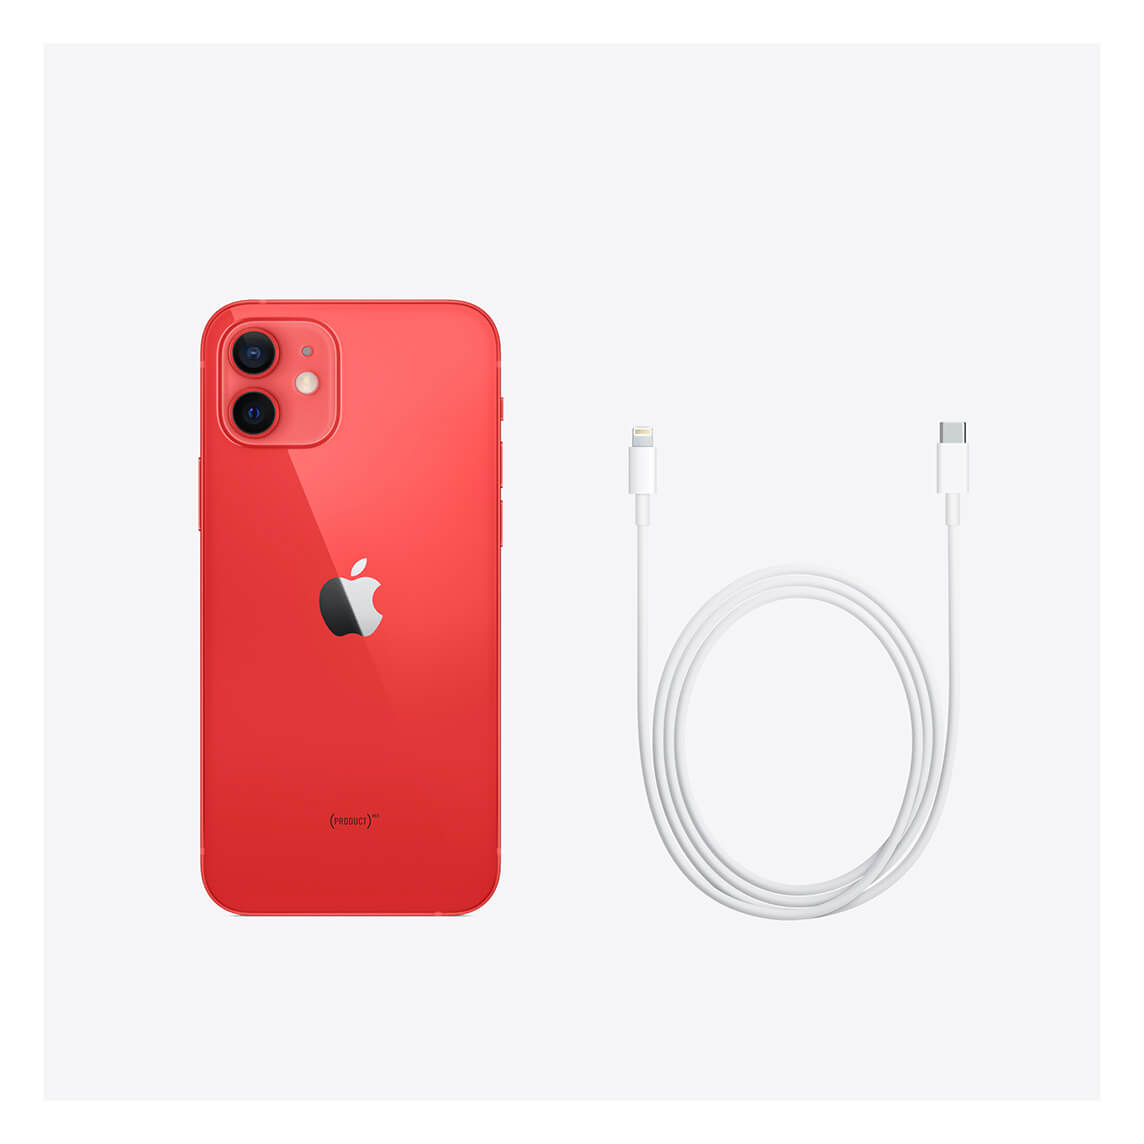 iPhone 12 mini (PRODUCT)RED - zestaw